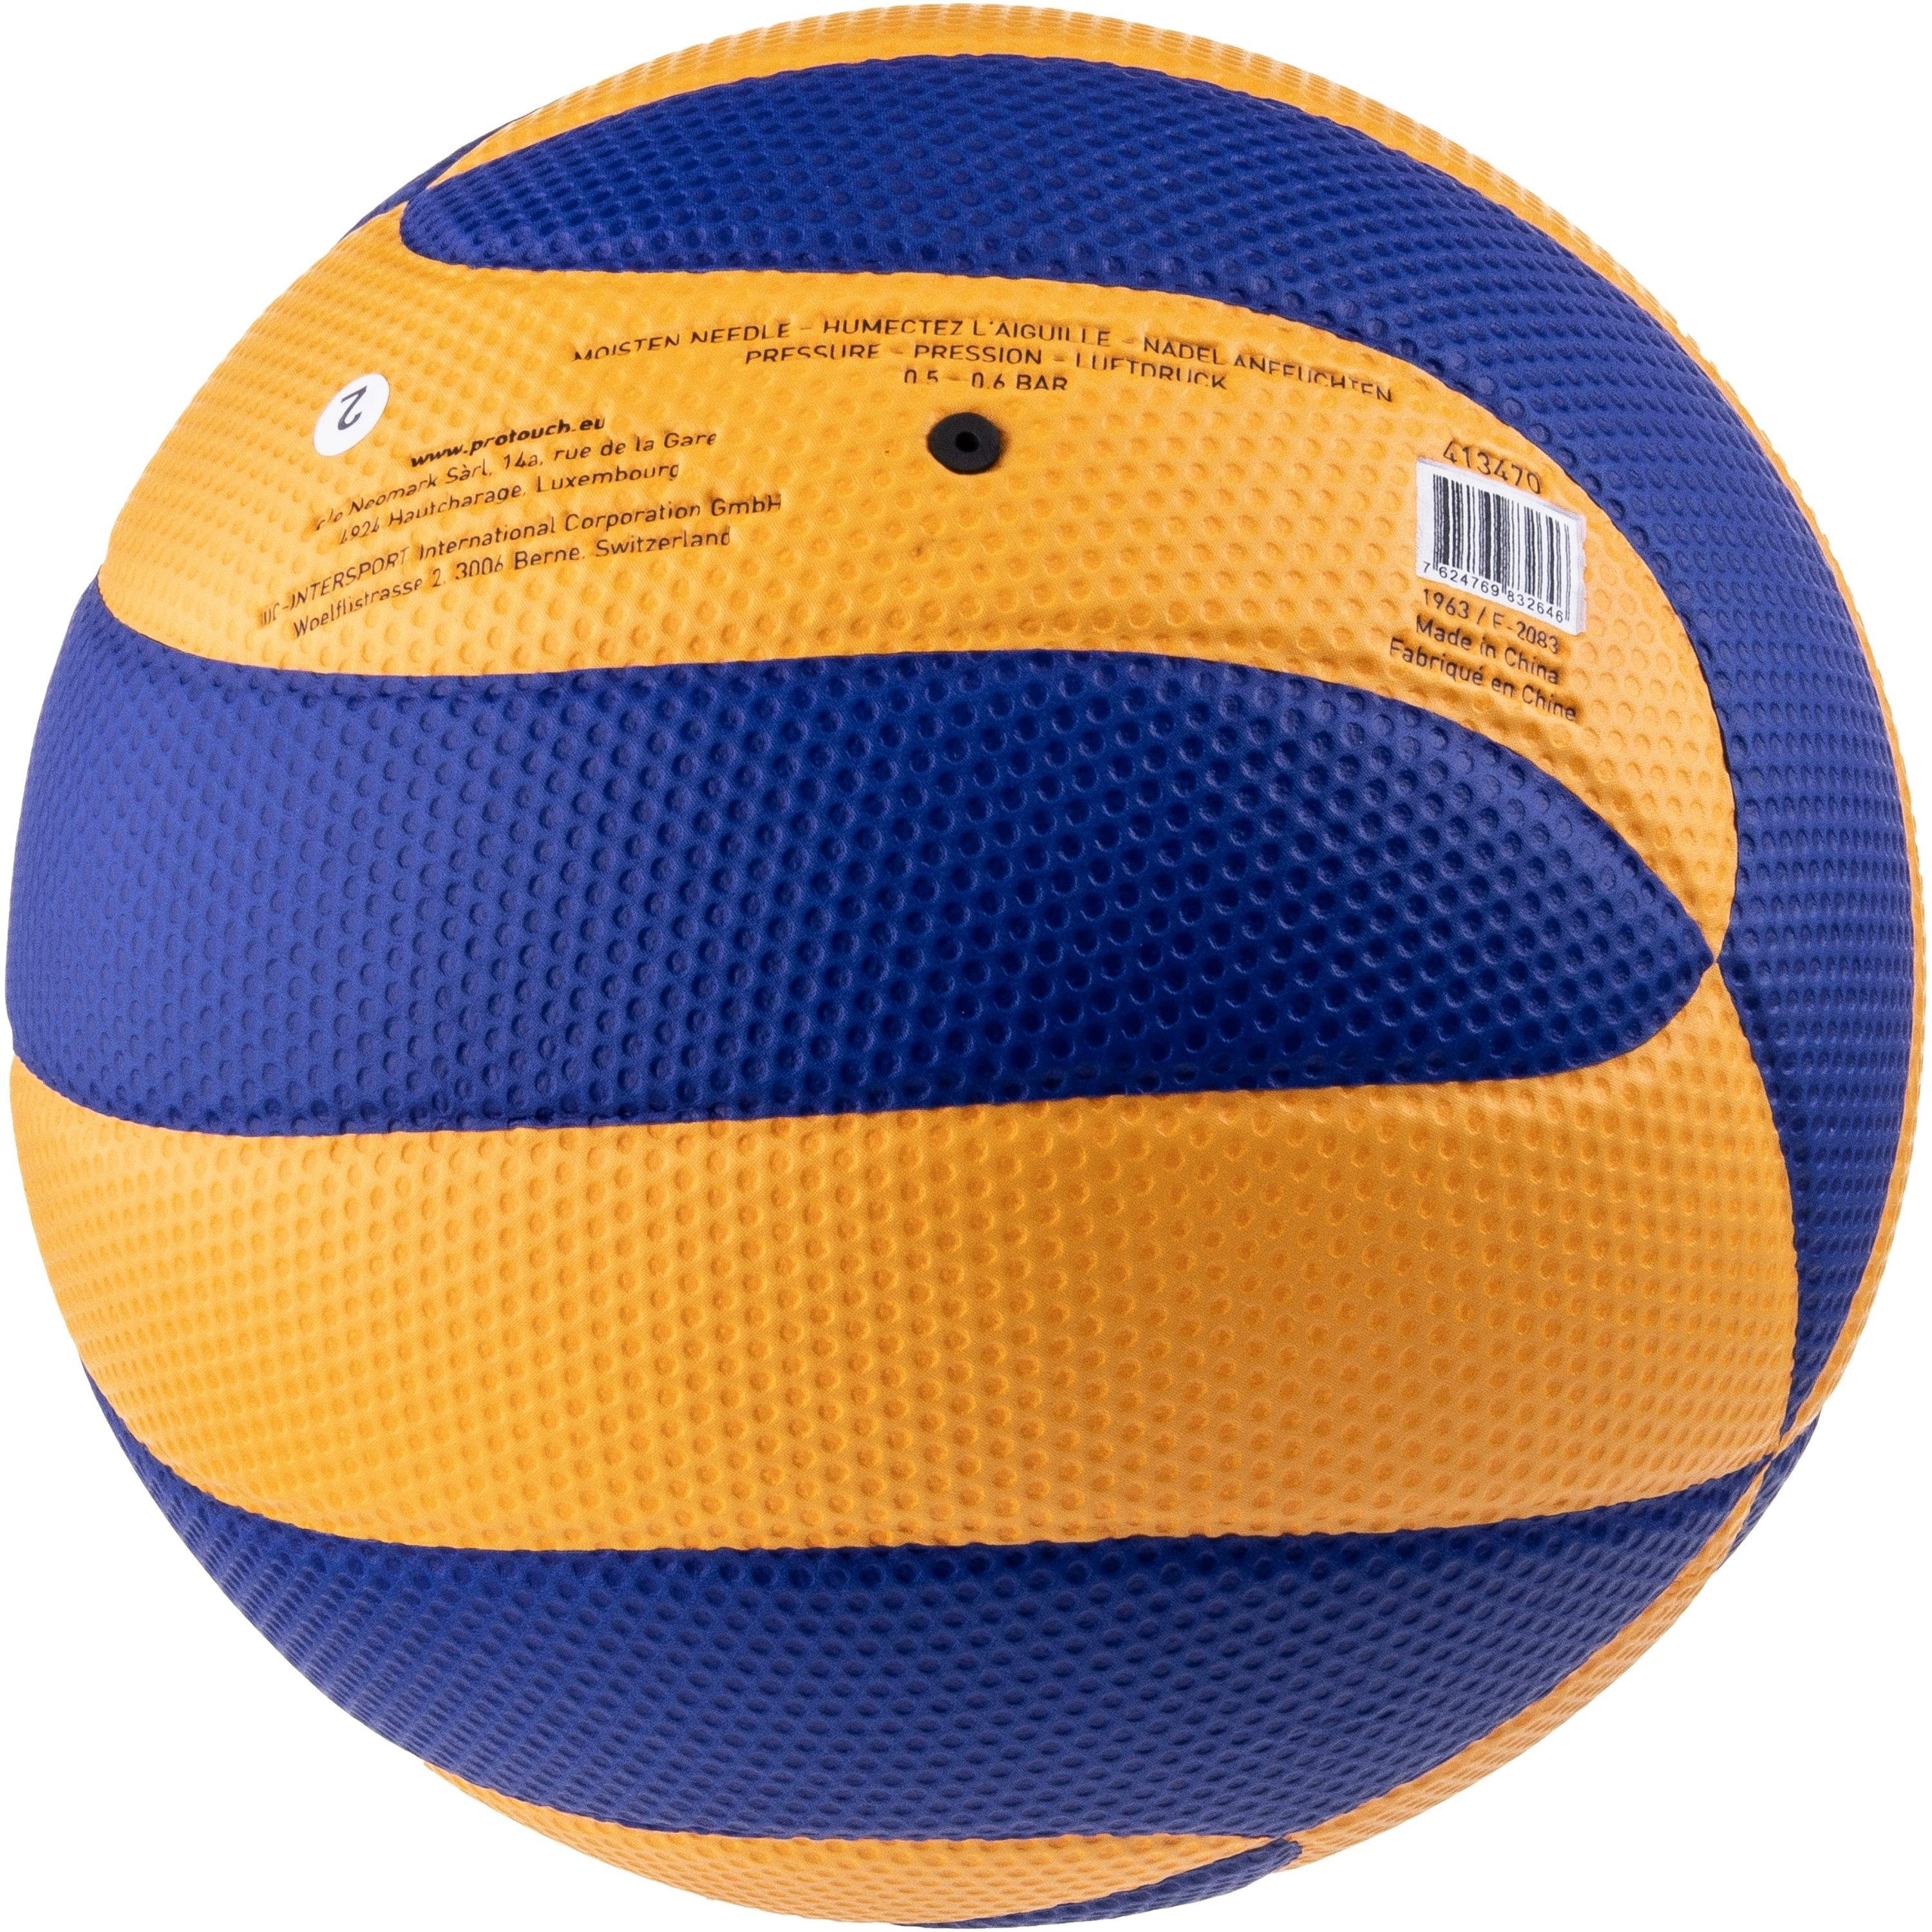 Volleyball Spiko Pro 500 Touch